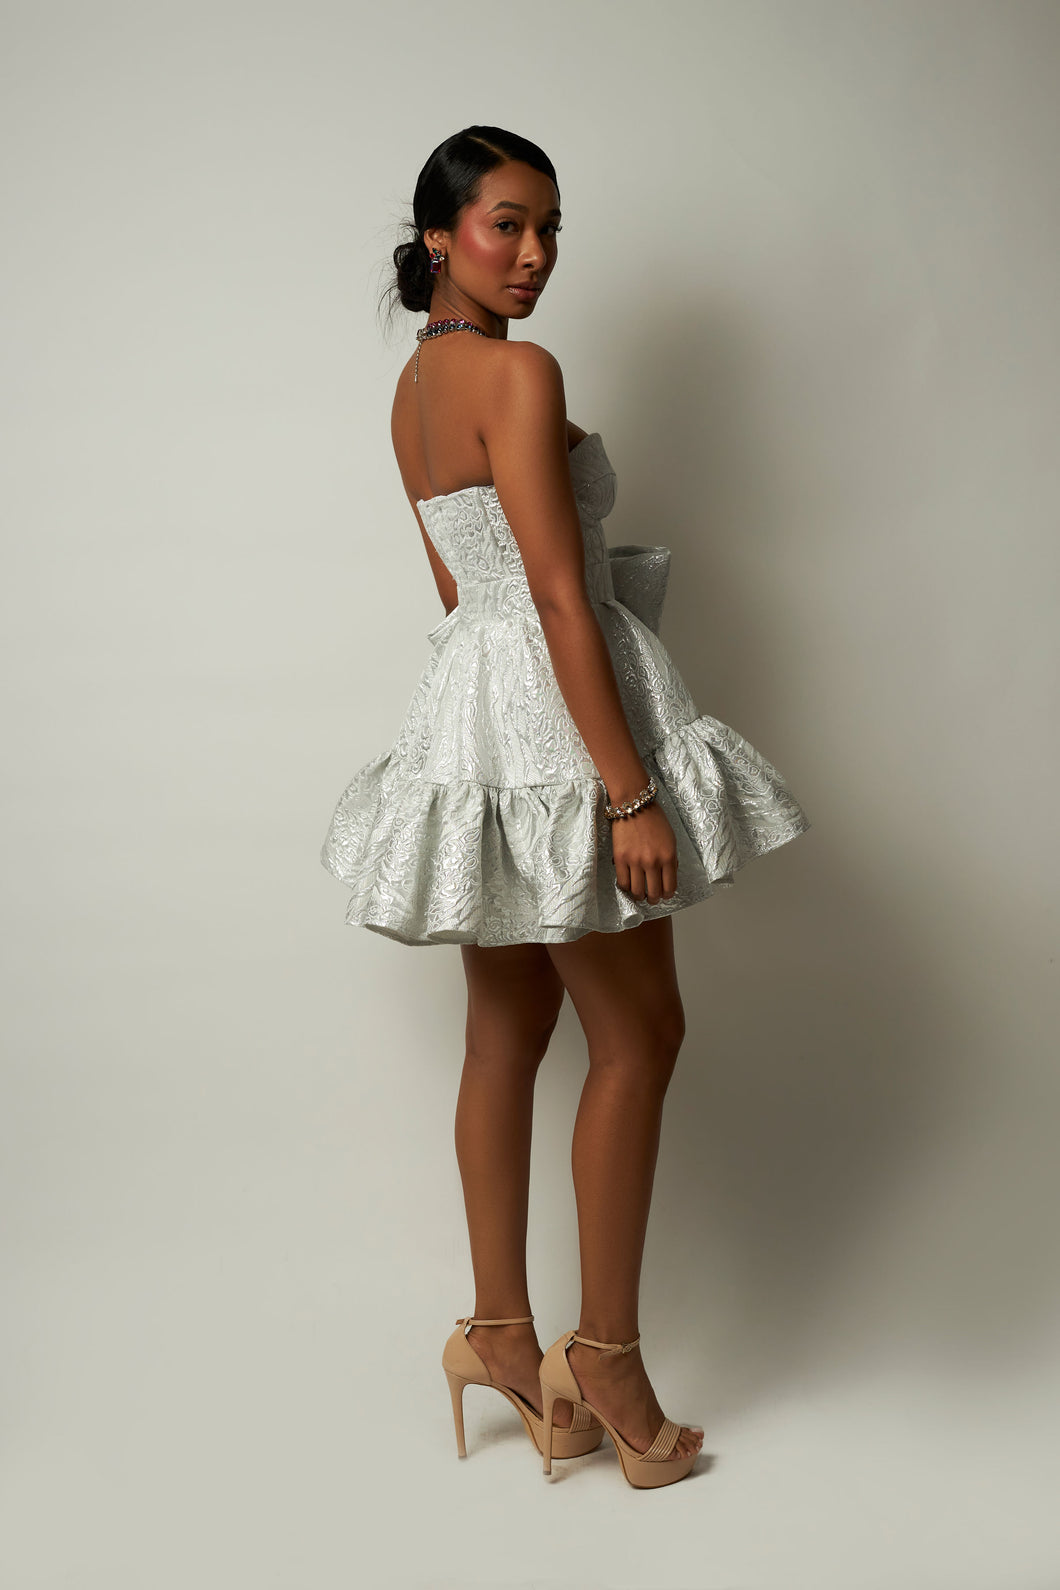 Strapless dress with bow